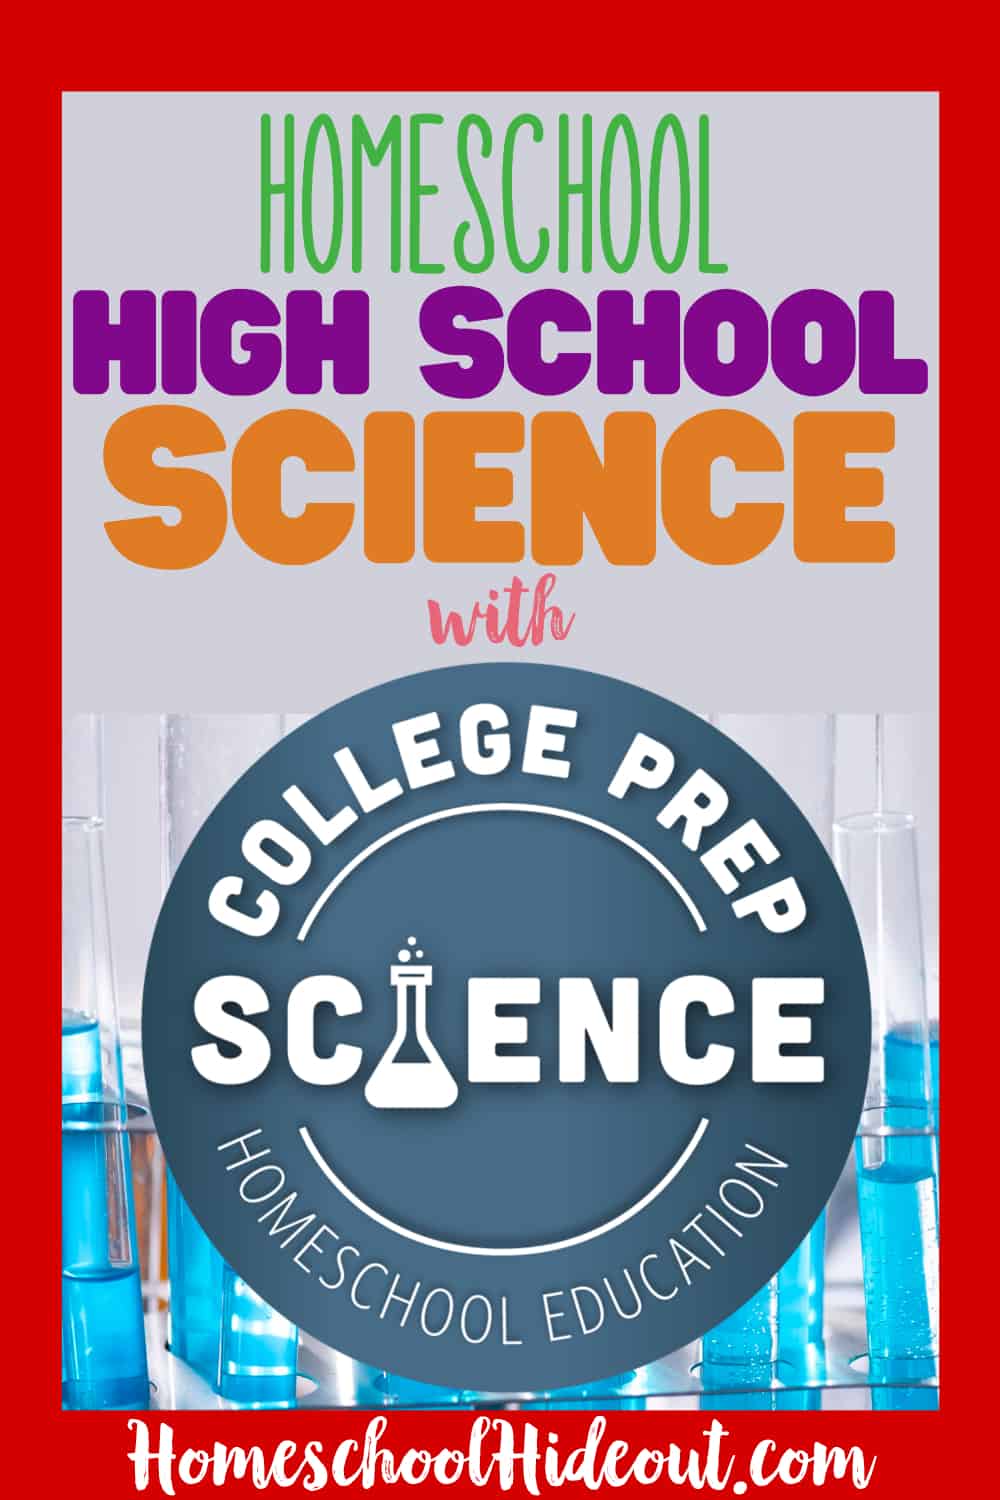 We finally broke through! No more struggle with homeschool high school science! The littles are happy and my teen can do her work again, thanks to College Prep Science! #onlineclasses #homeschooling #littles